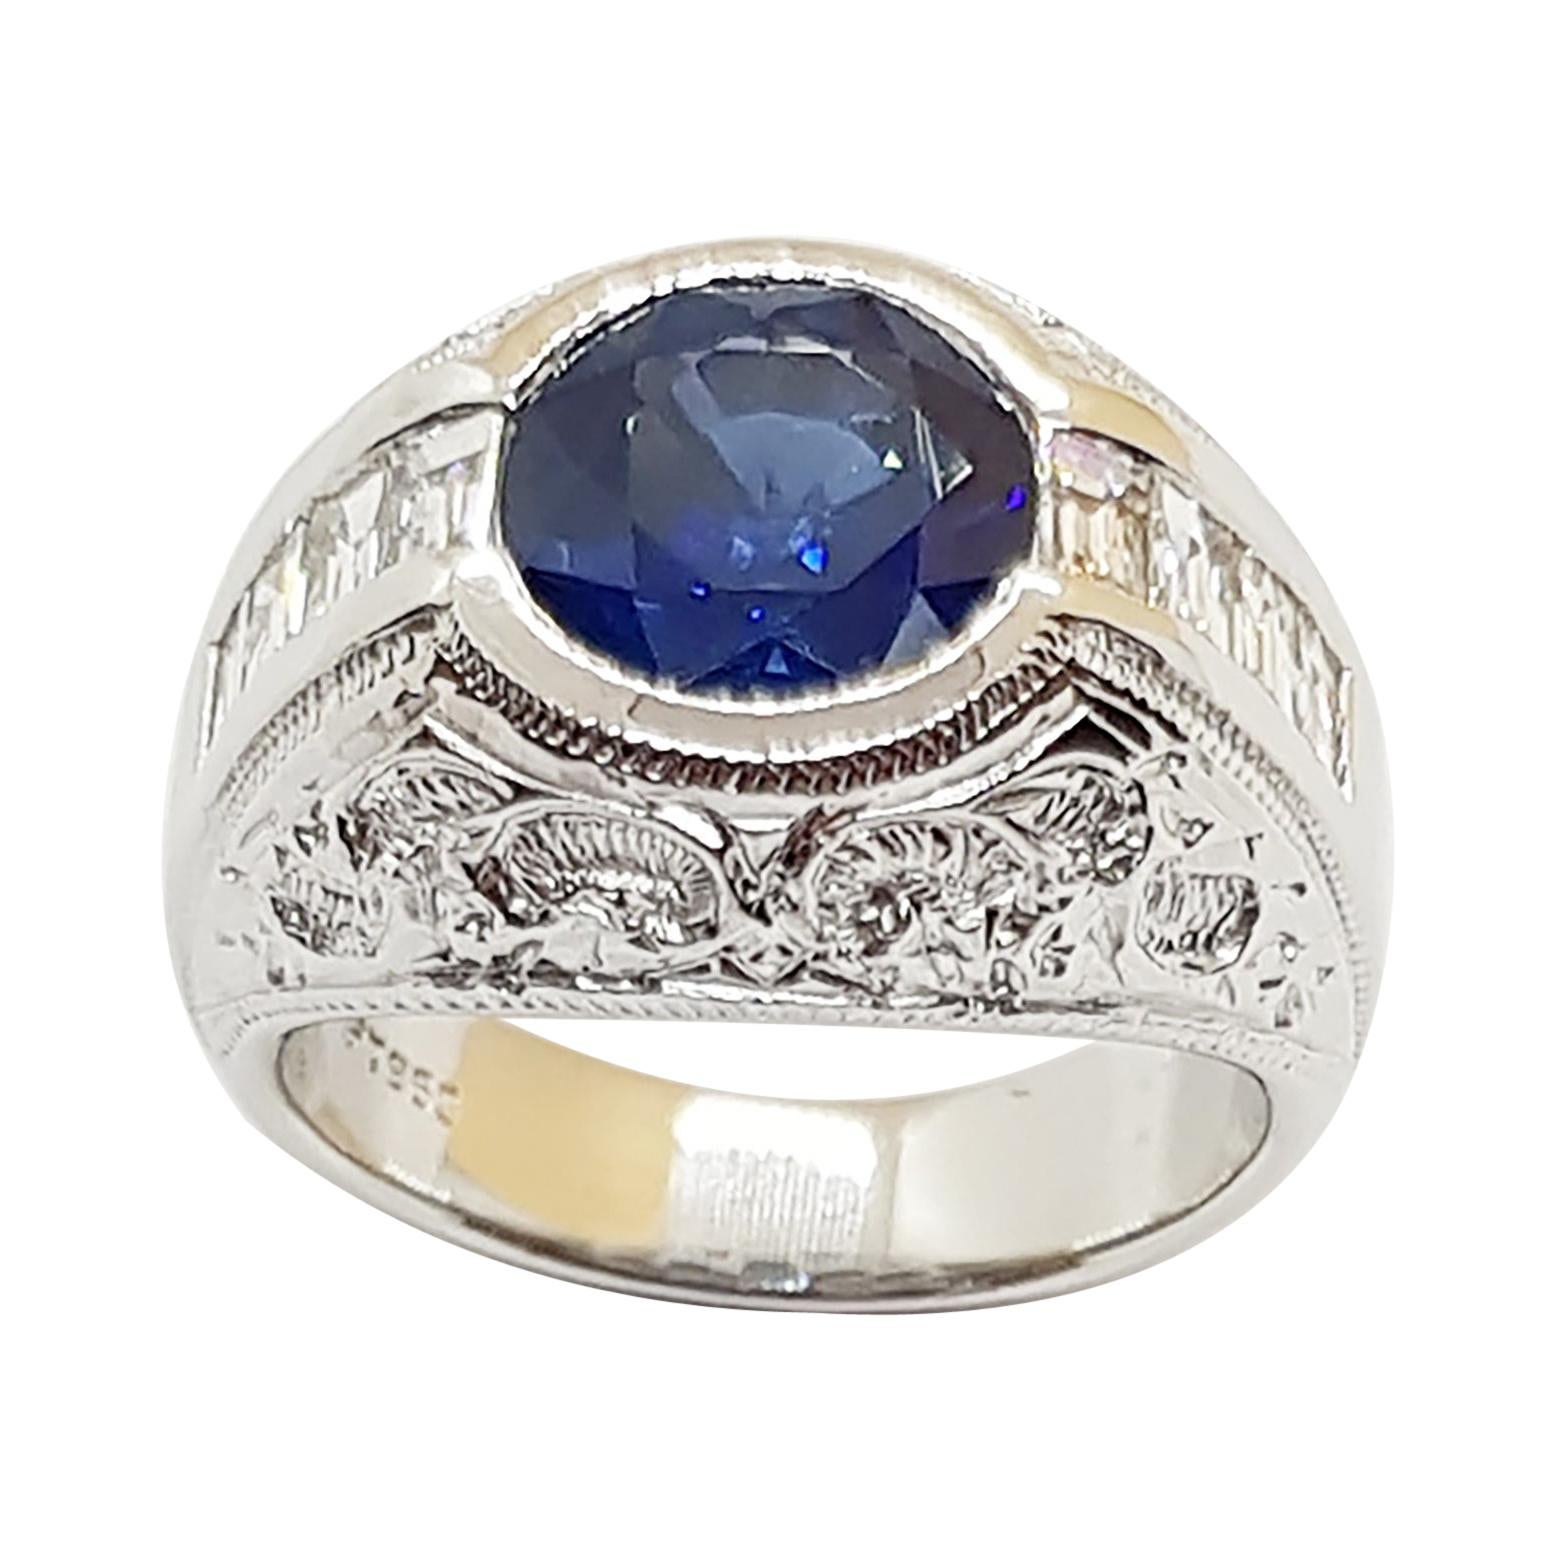 Round Cut Blue Sapphire, Diamond with Engraving Ring Set in Platinum 950